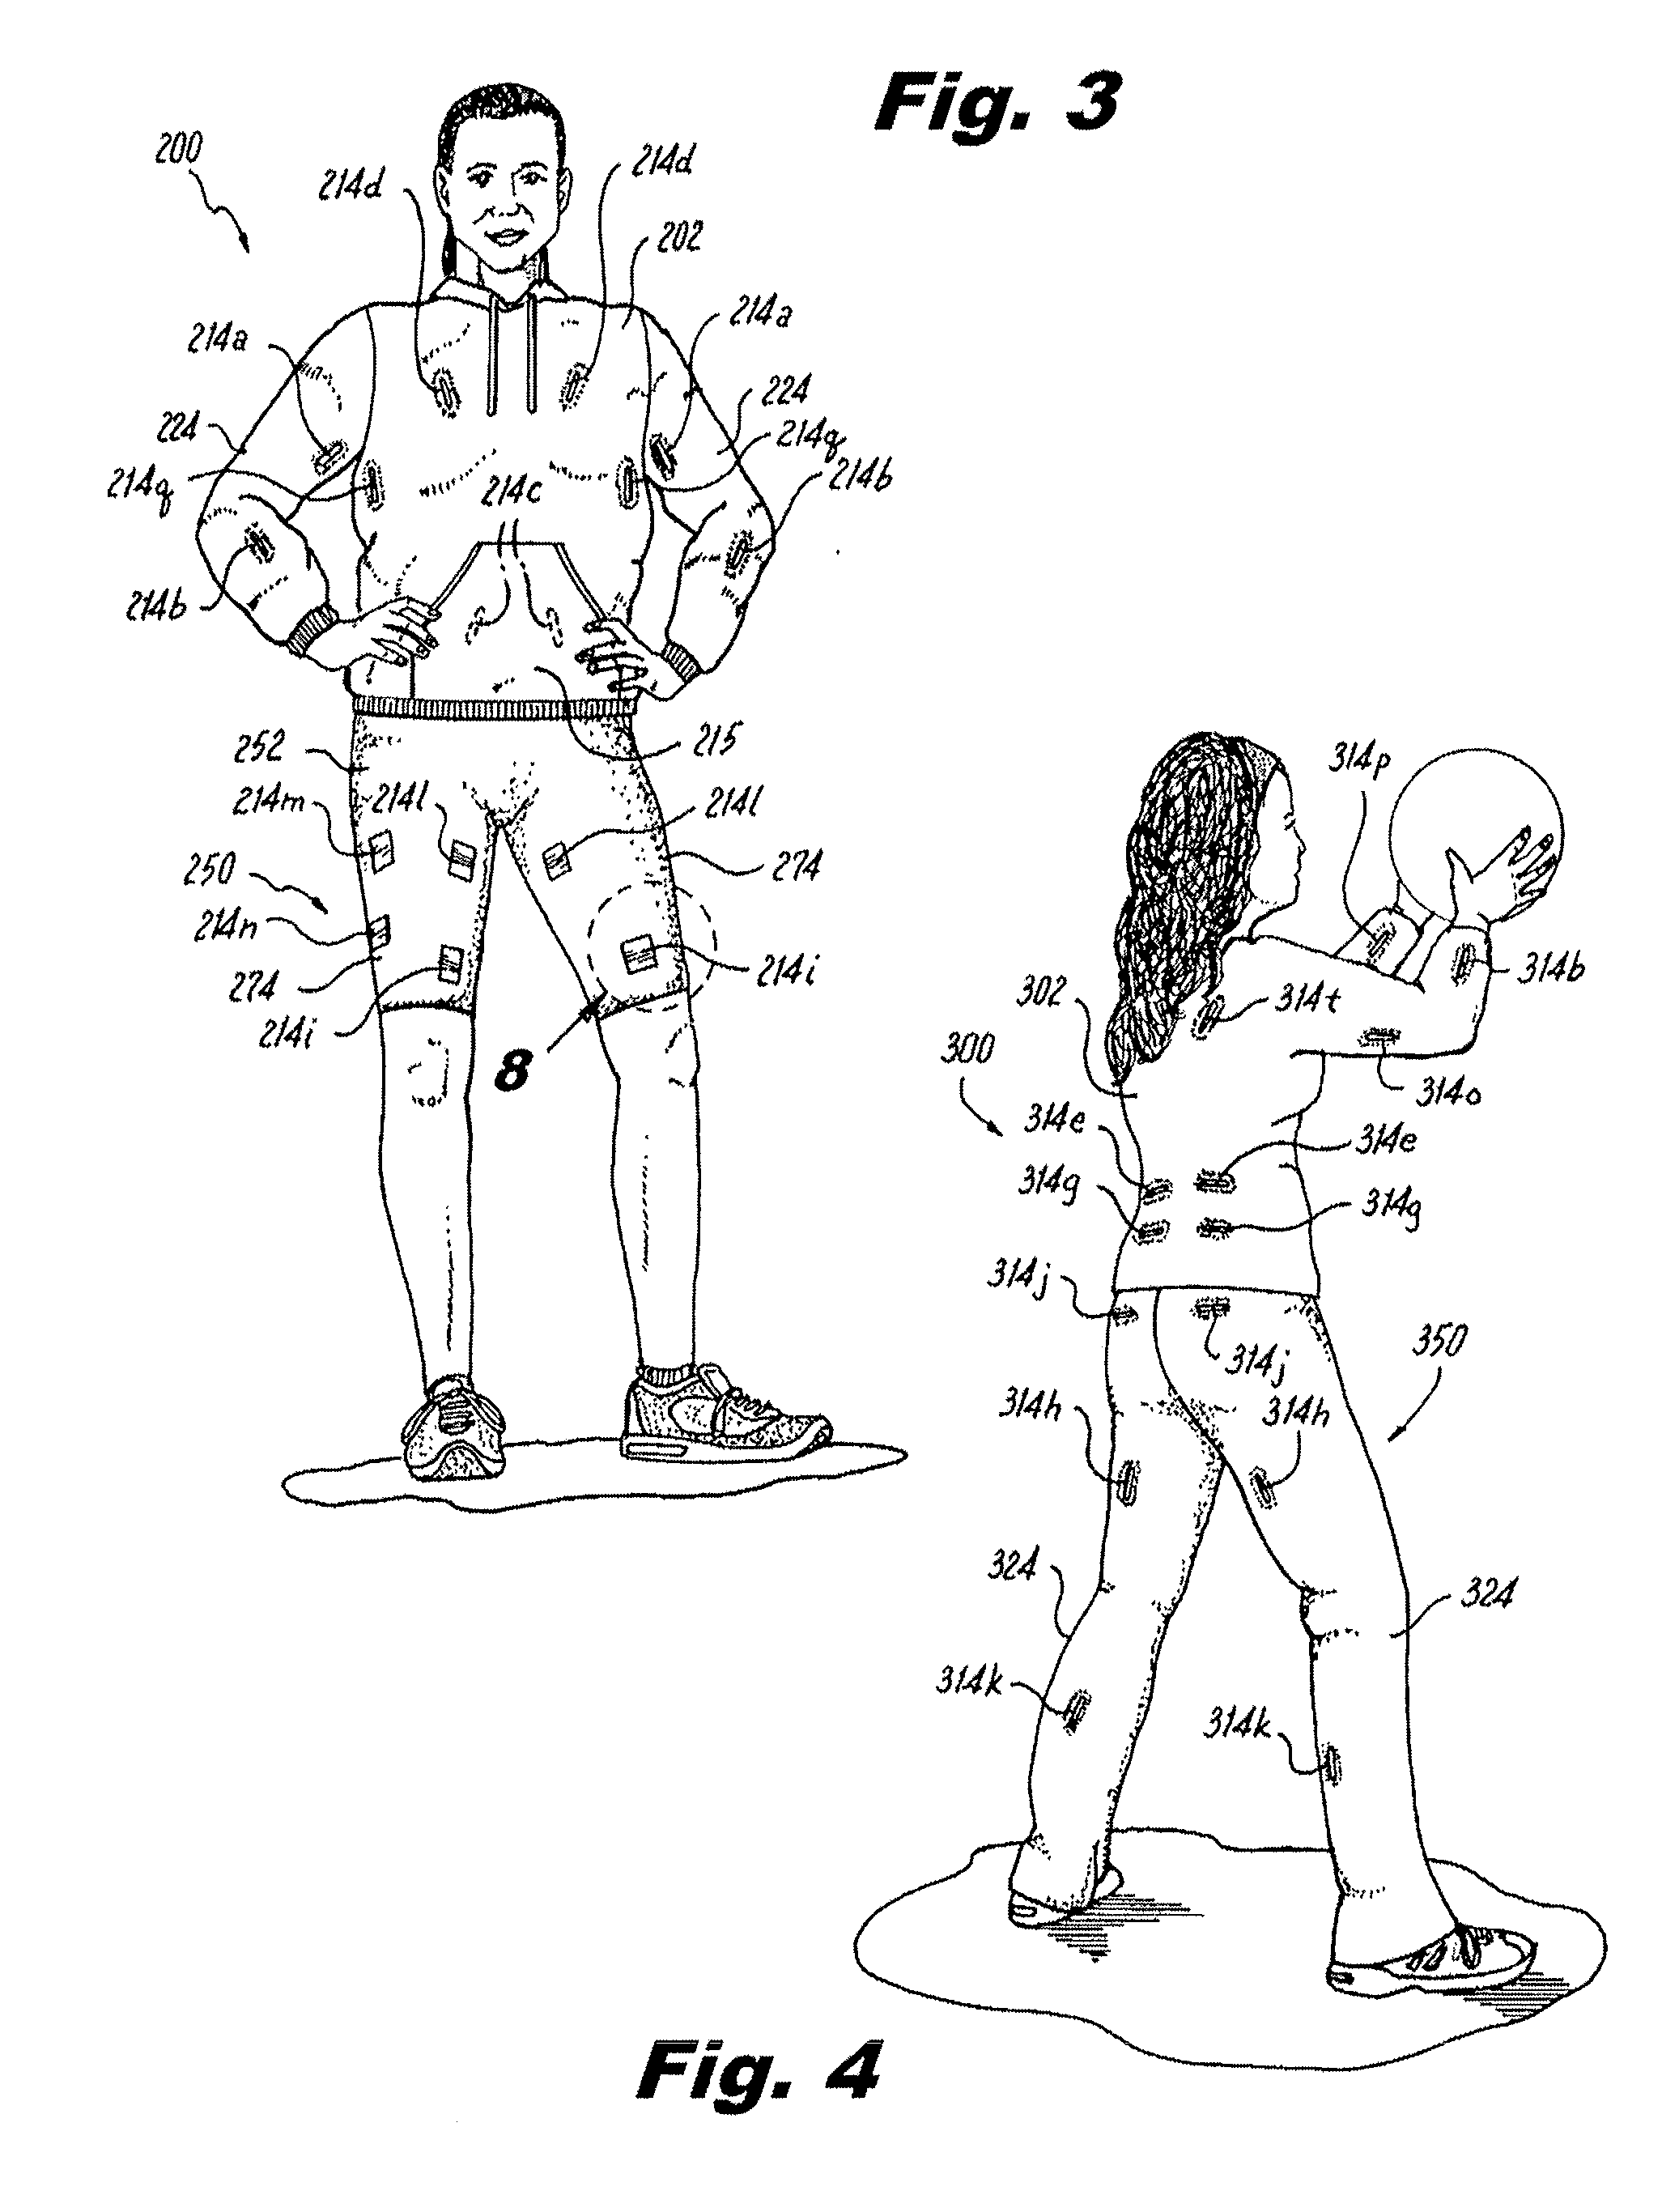 Garments for providing access for sensors to contact skin